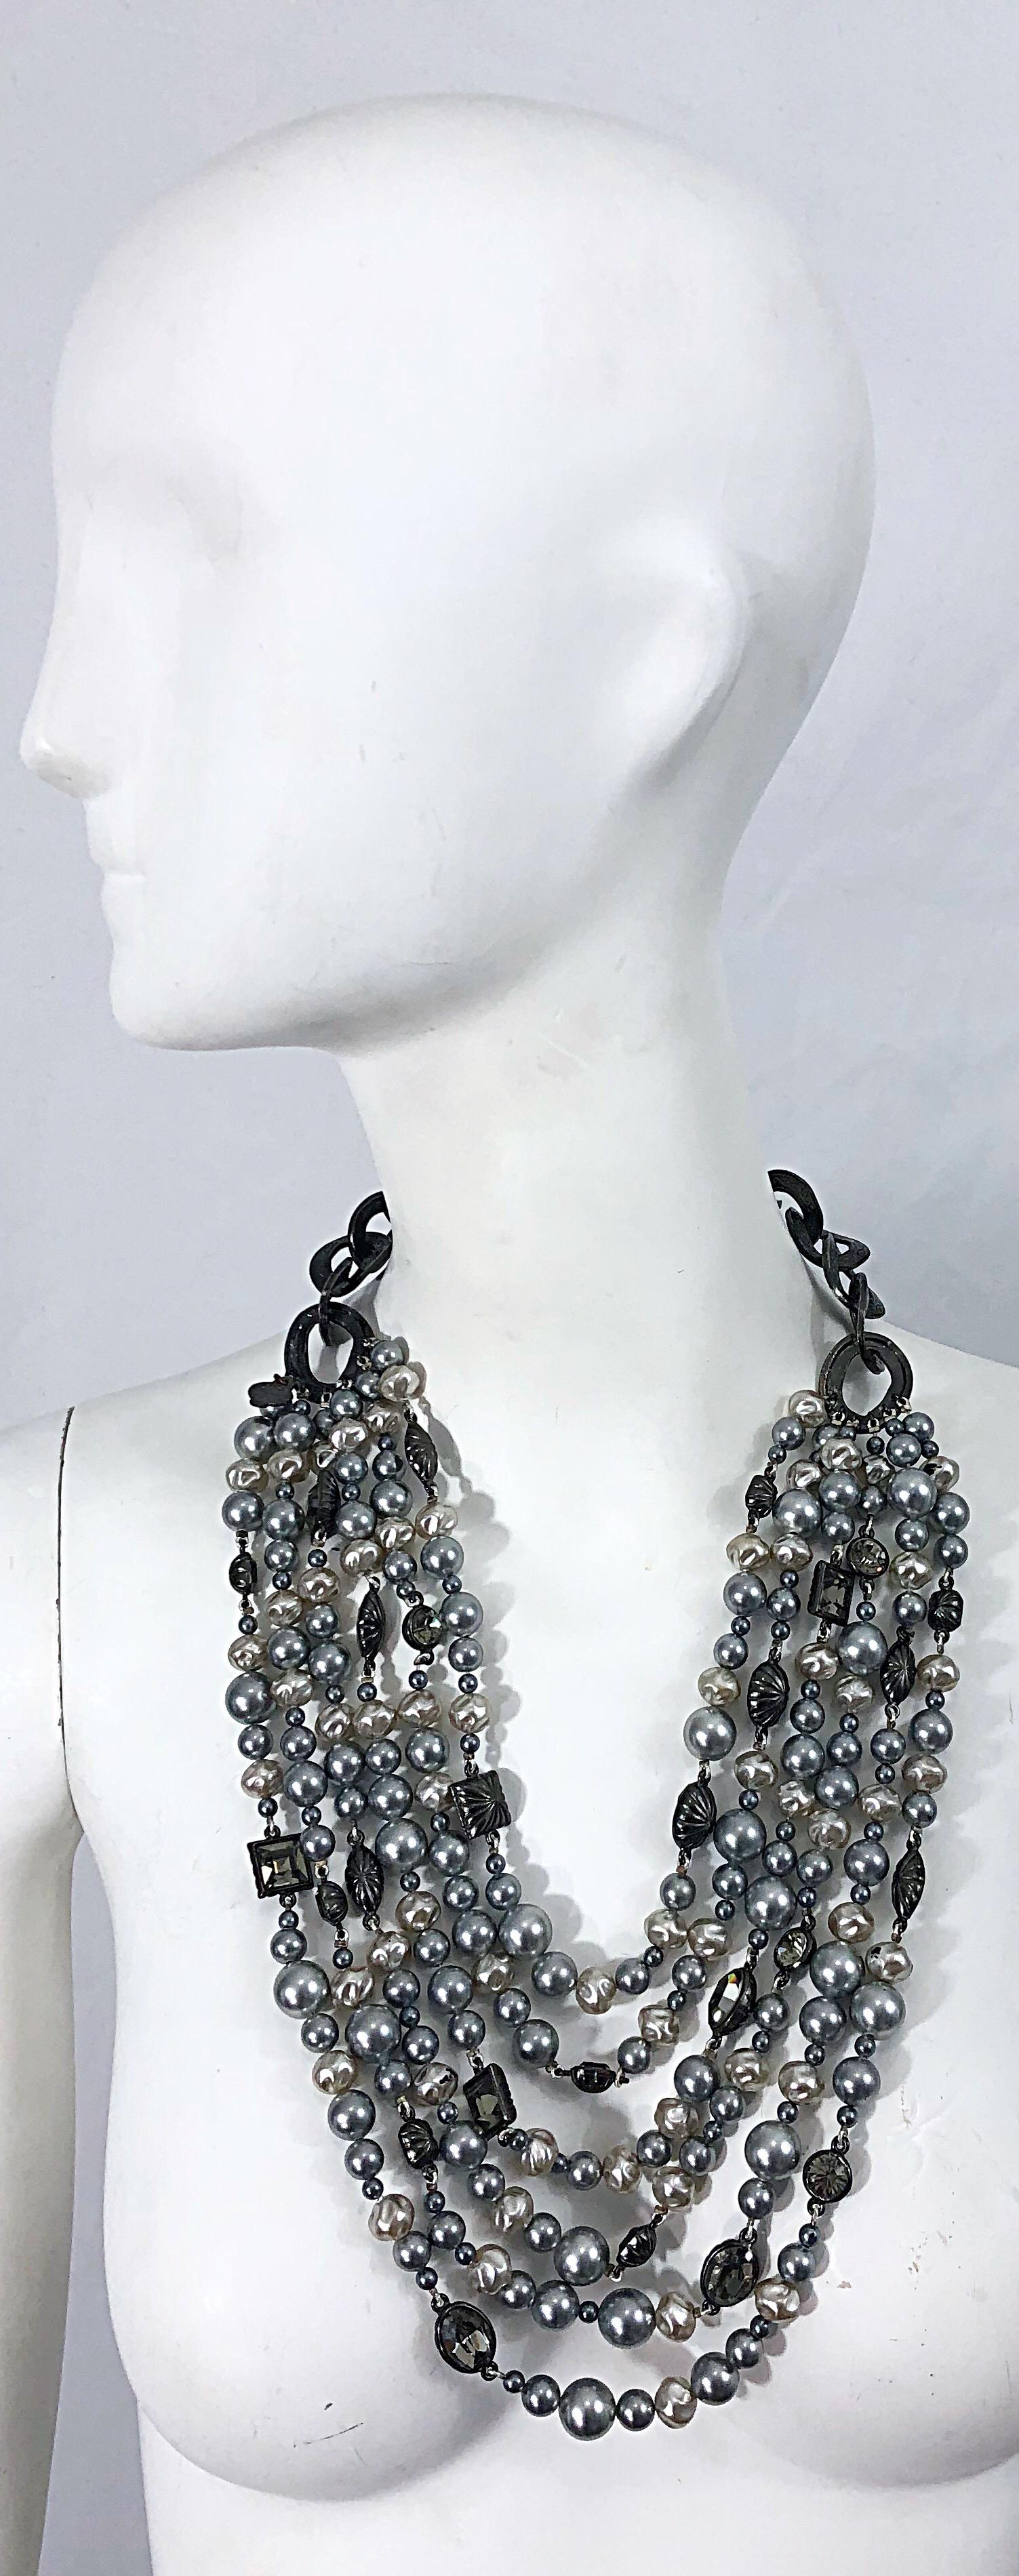 Rare and collectible vintage TOM FORD for YVES SAINT LAURENT Rive Gauche silver and gunmetal pearl and rhinestone statement necklace ! Features six strands of faux pearls intertwined with large square, round, diamond cut rhinestones. Intricately